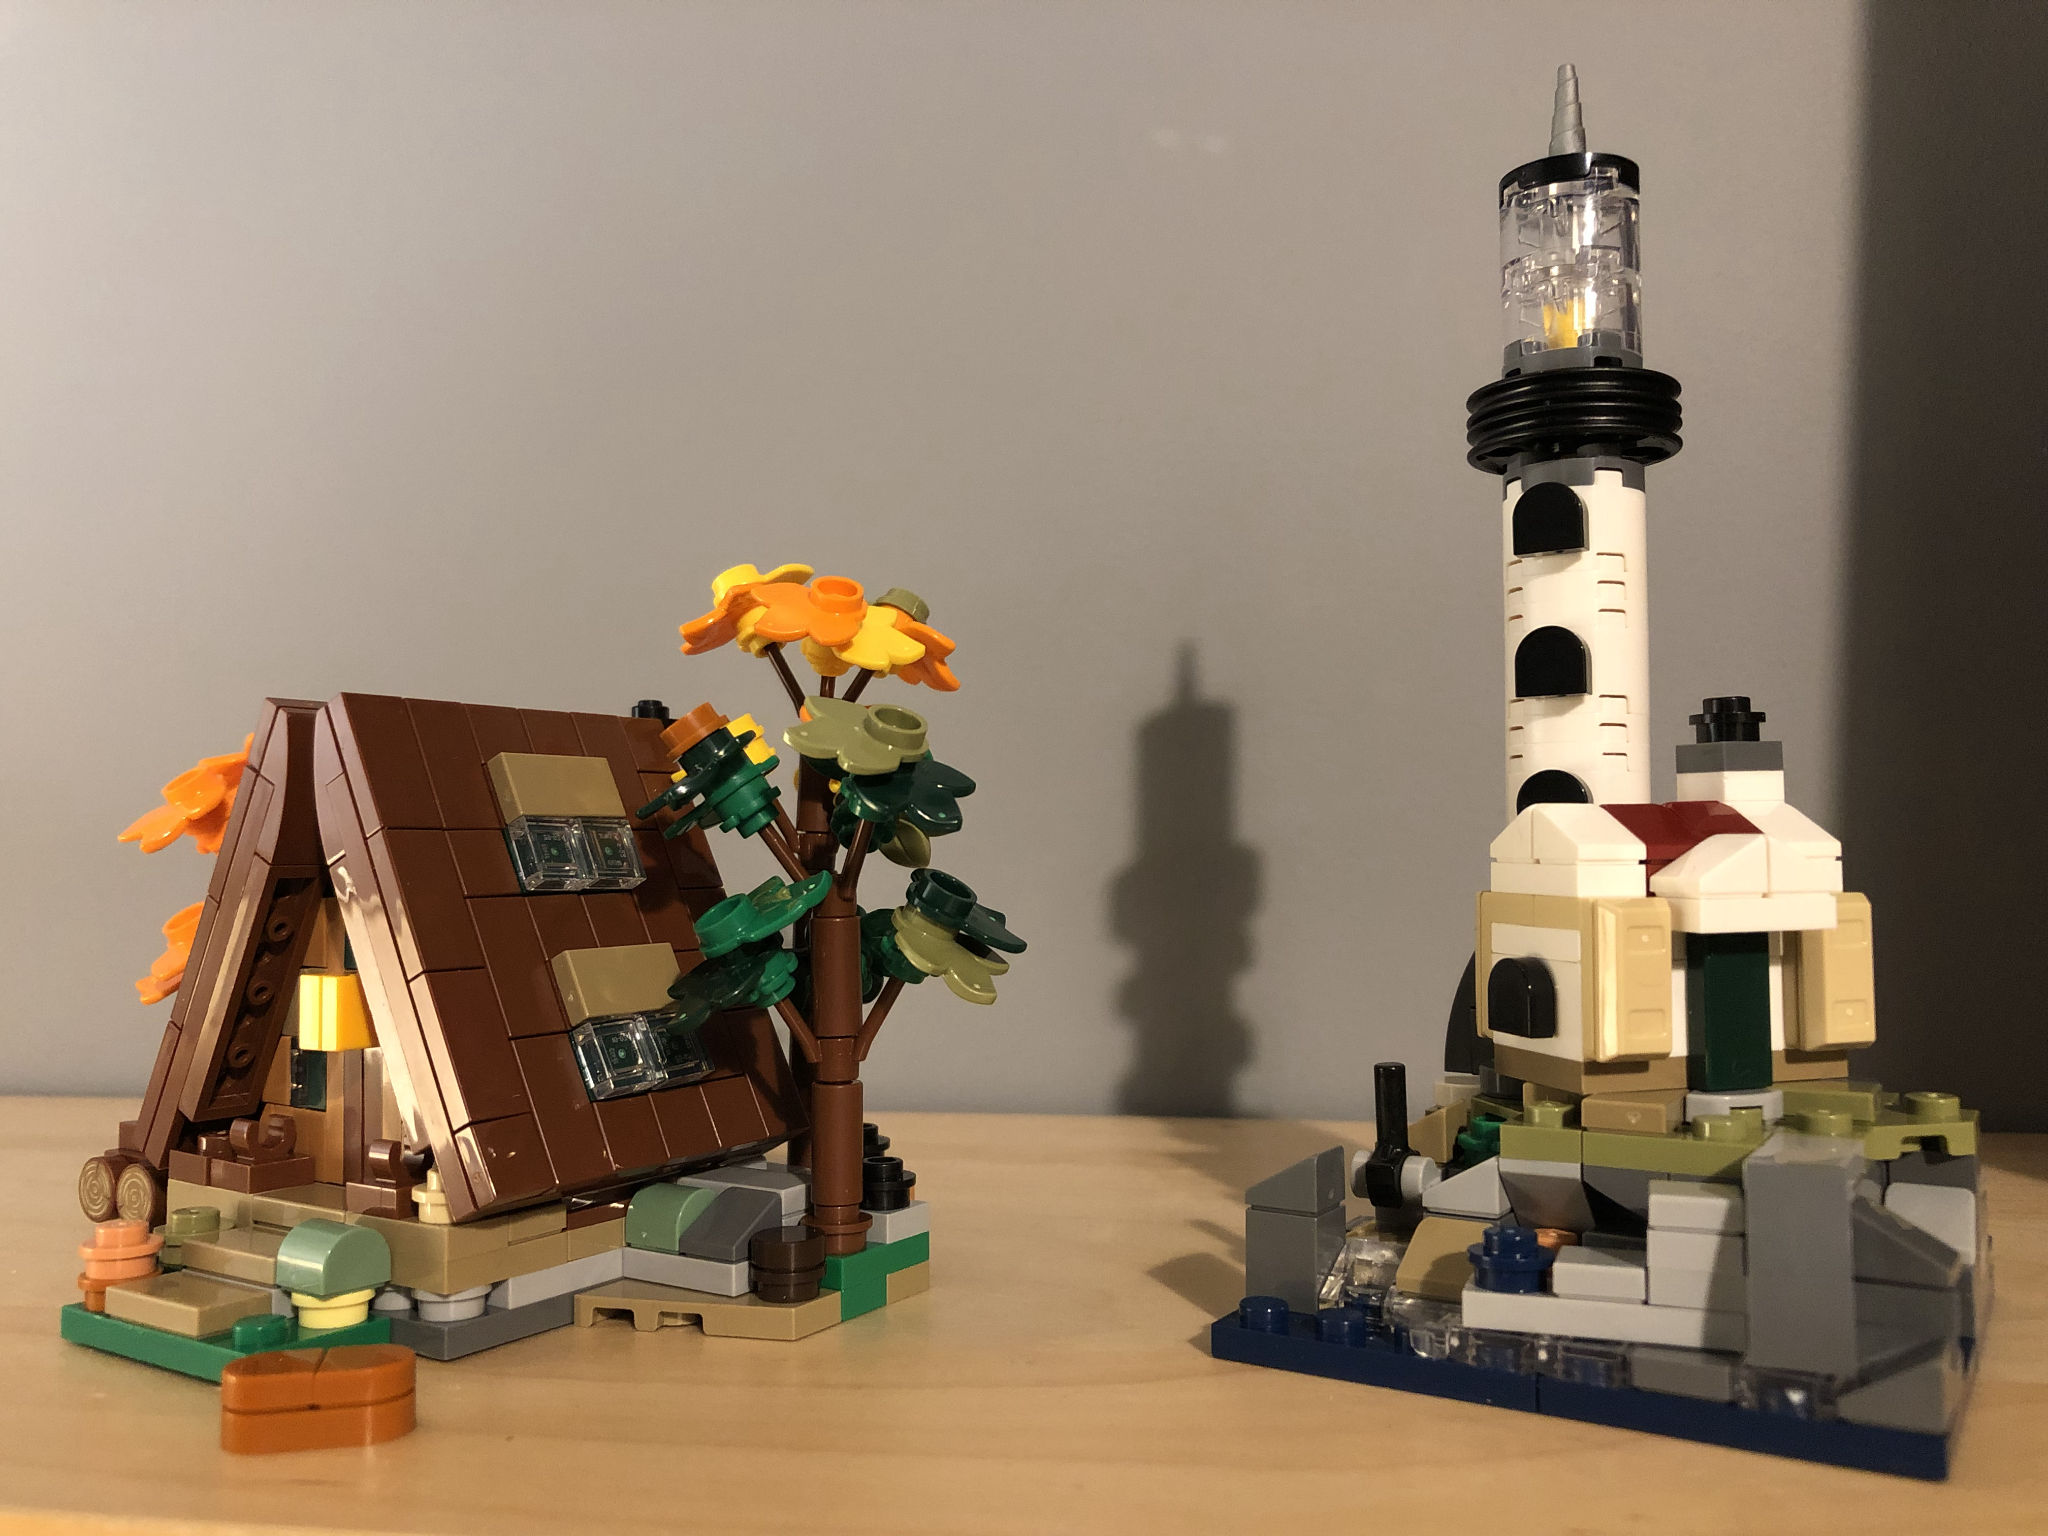 Two microscale models designed by Chris Tromans